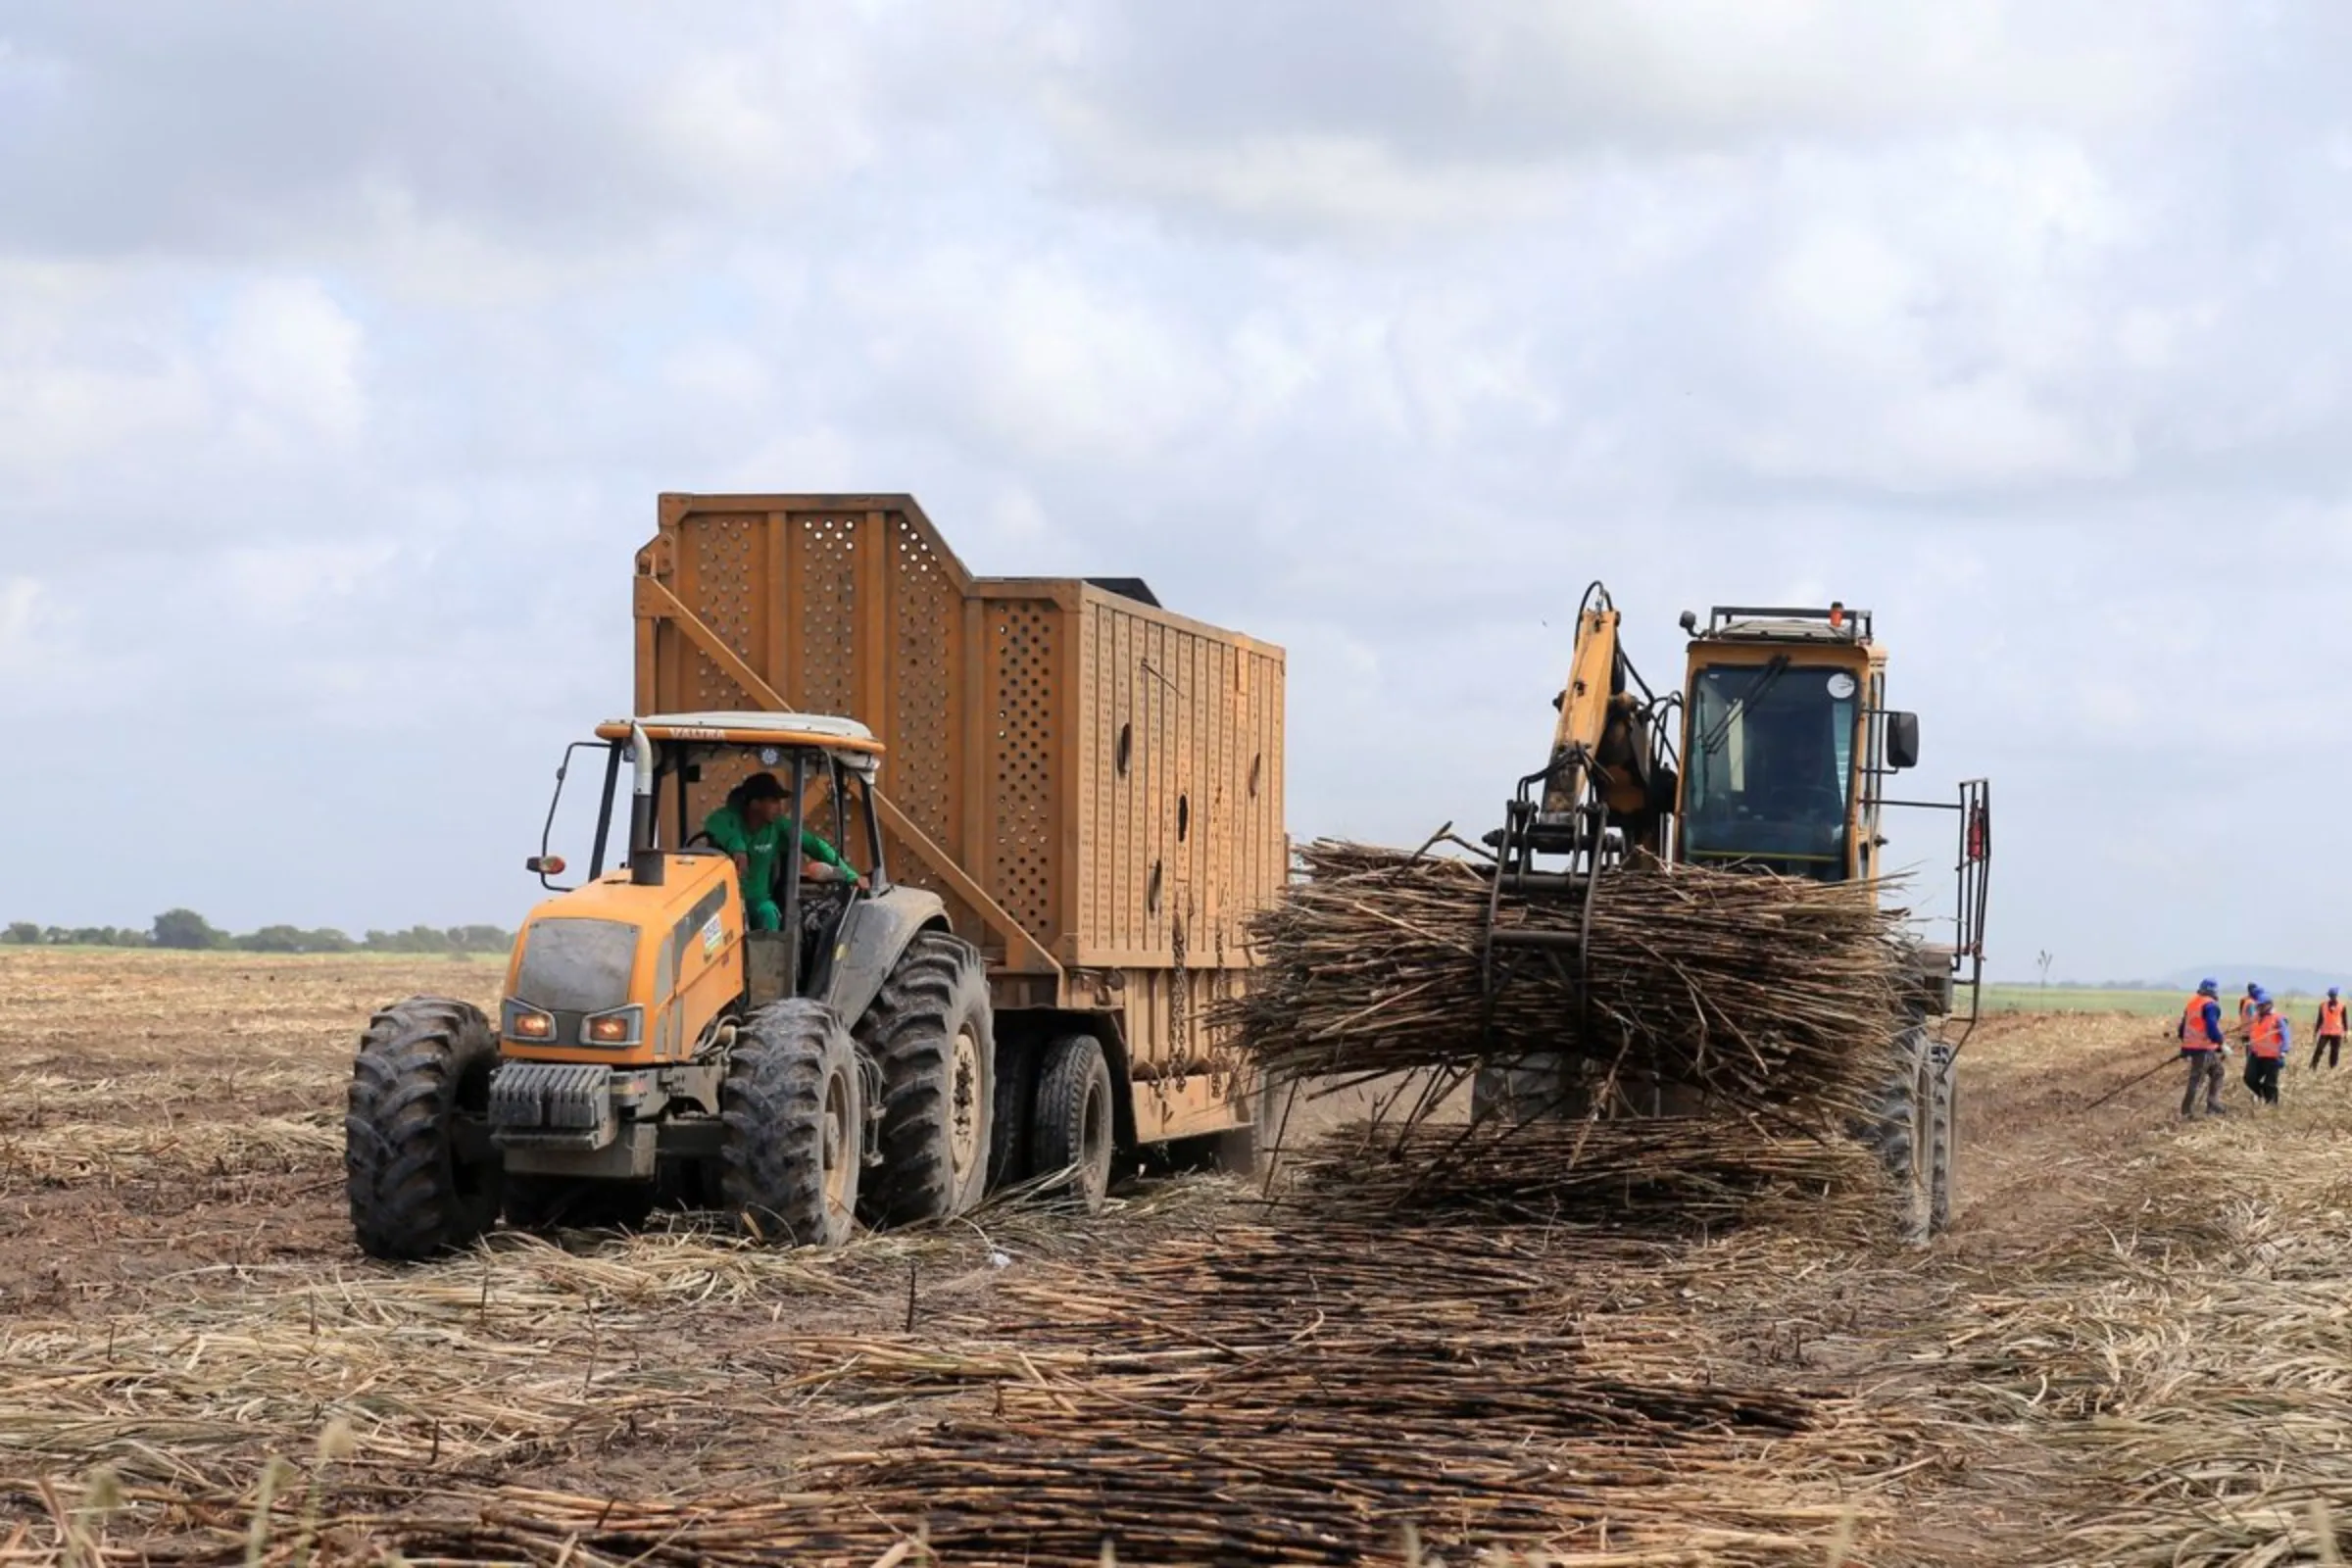 Machinery collects sugarcane harvested by workers in a plantation near Maceio, Brazil, on September 27, 2021